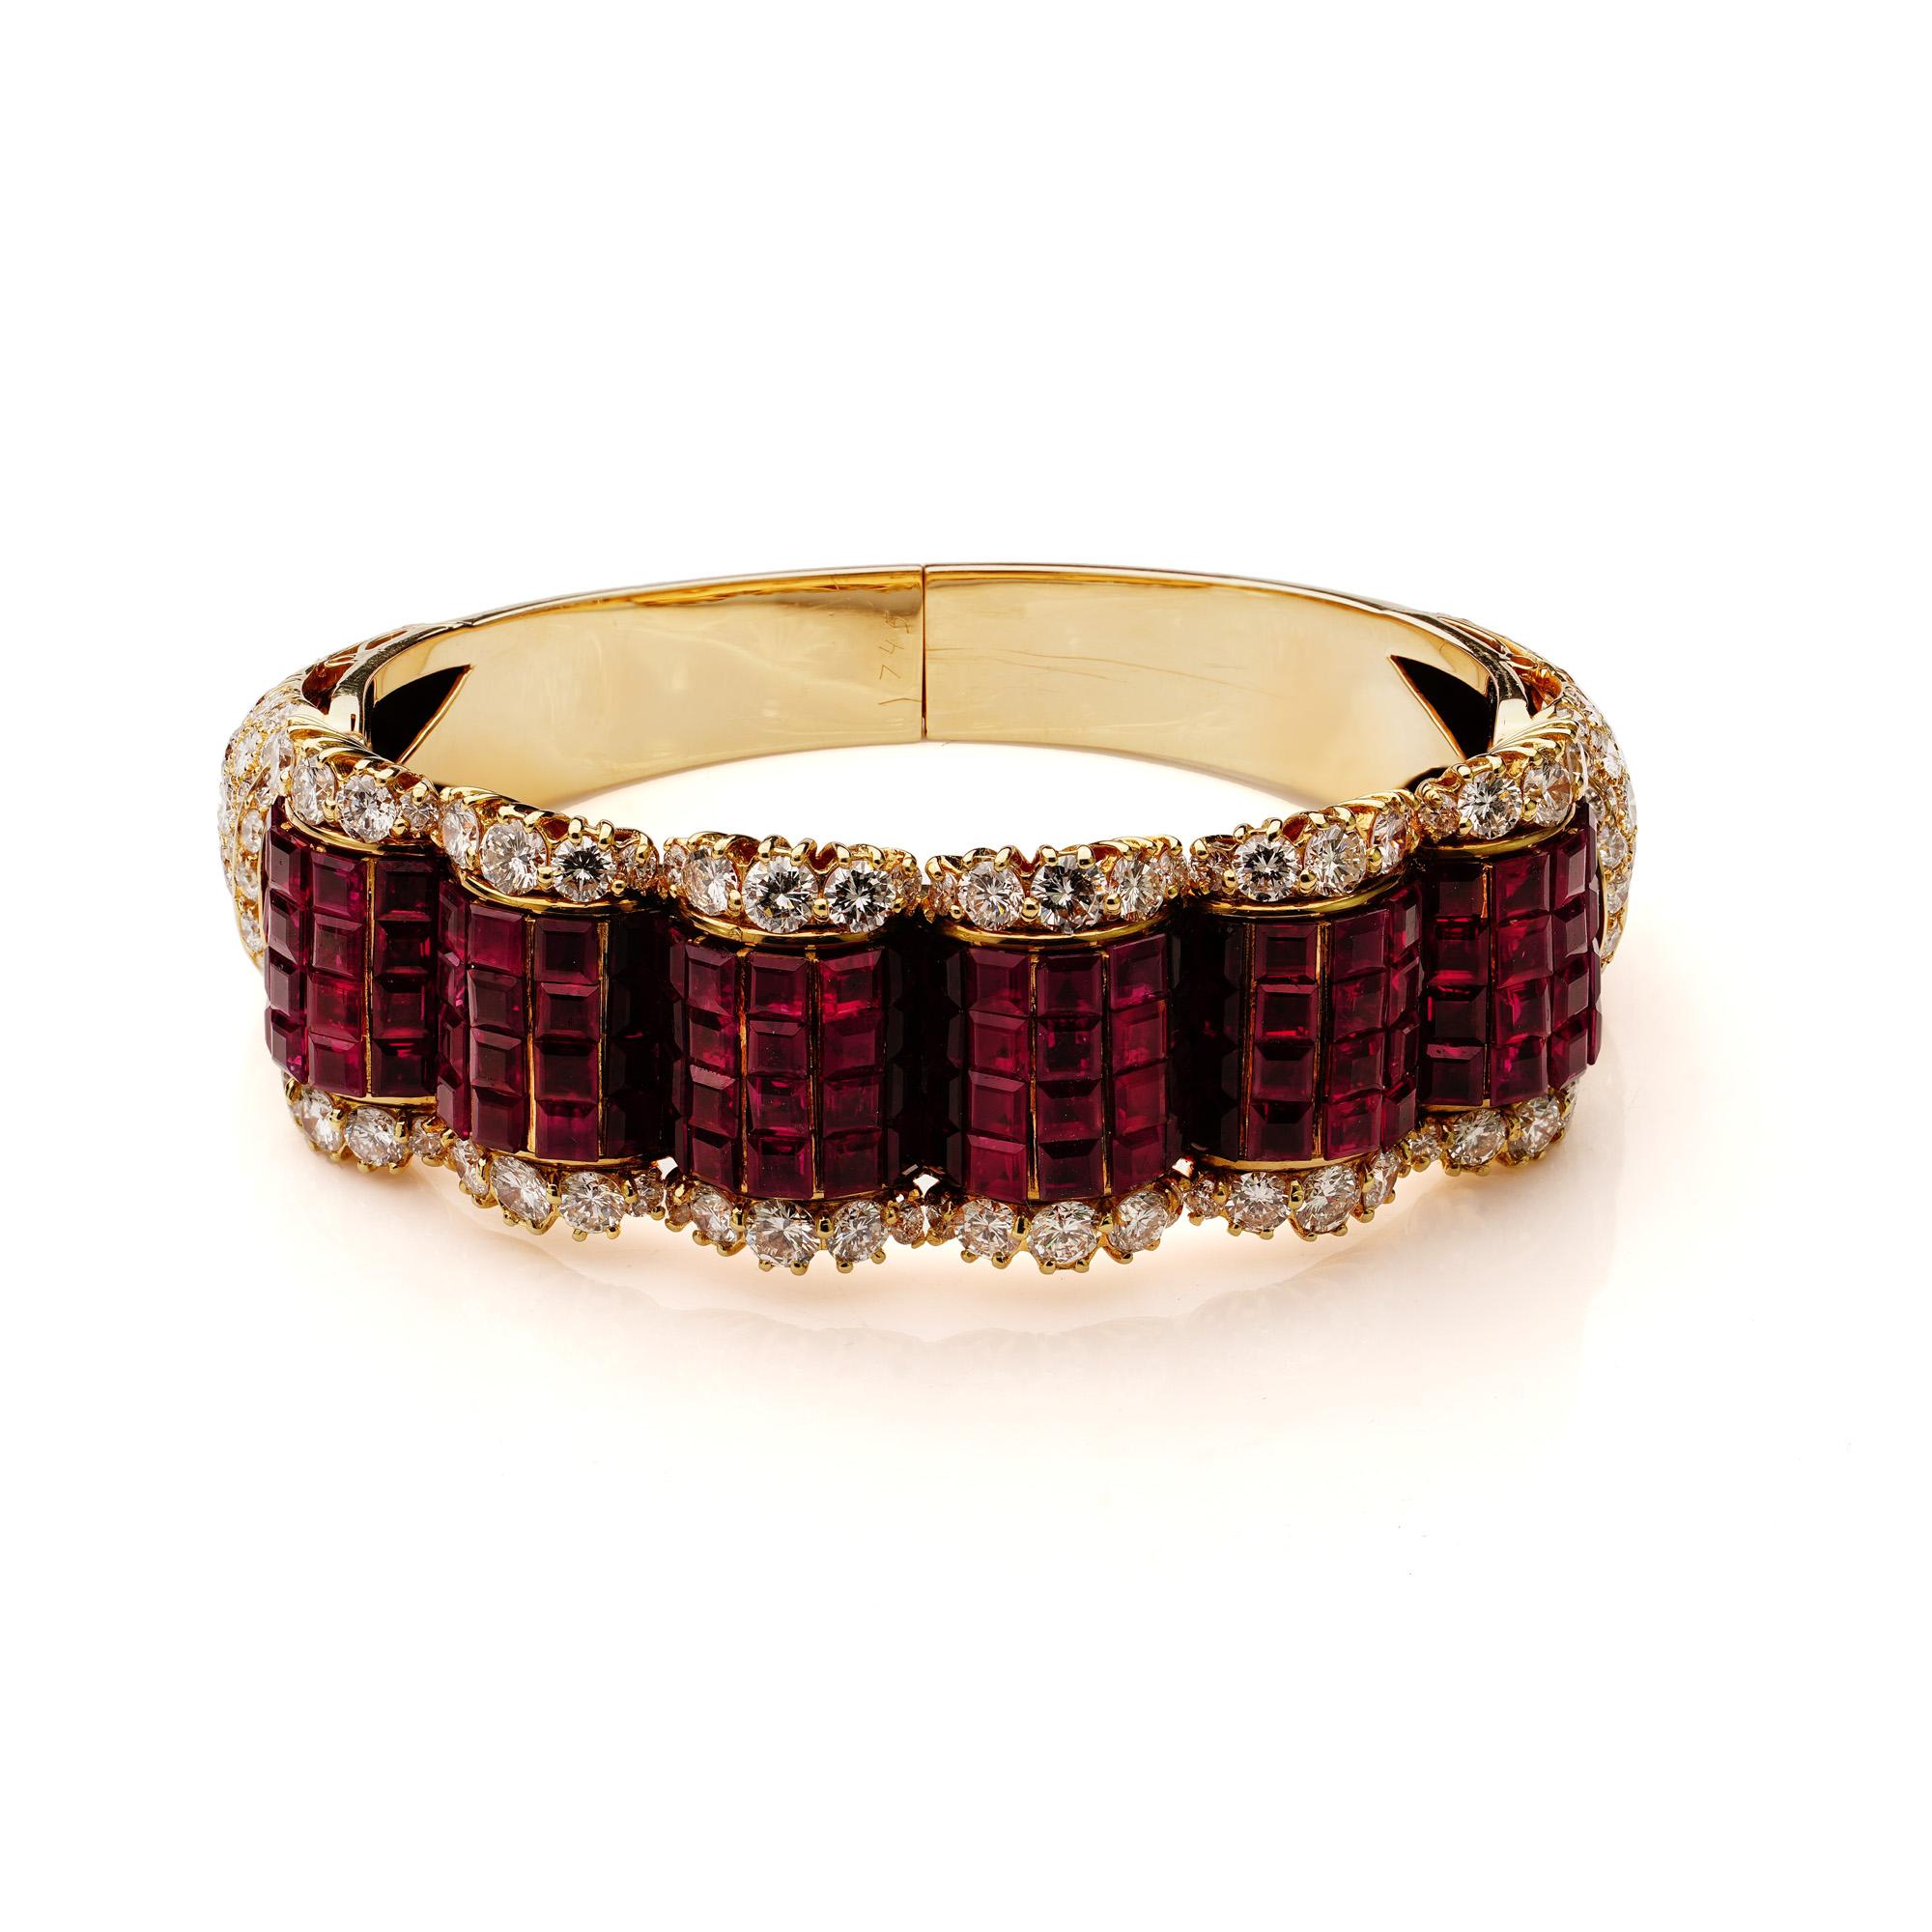 14kt. yellow gold bangle set with 18 ct. rubies and  12.84 ct. diamonds.

Dimensions:
Inner diameter - 5.4 cm, Width - 2.1 cm
Weight: 81 grams

Rubies -
Cut: Square
Quantity of Rubies: 120
Each Individual Size: 0.15 ct. 
Approx. total weight: 18 ct.